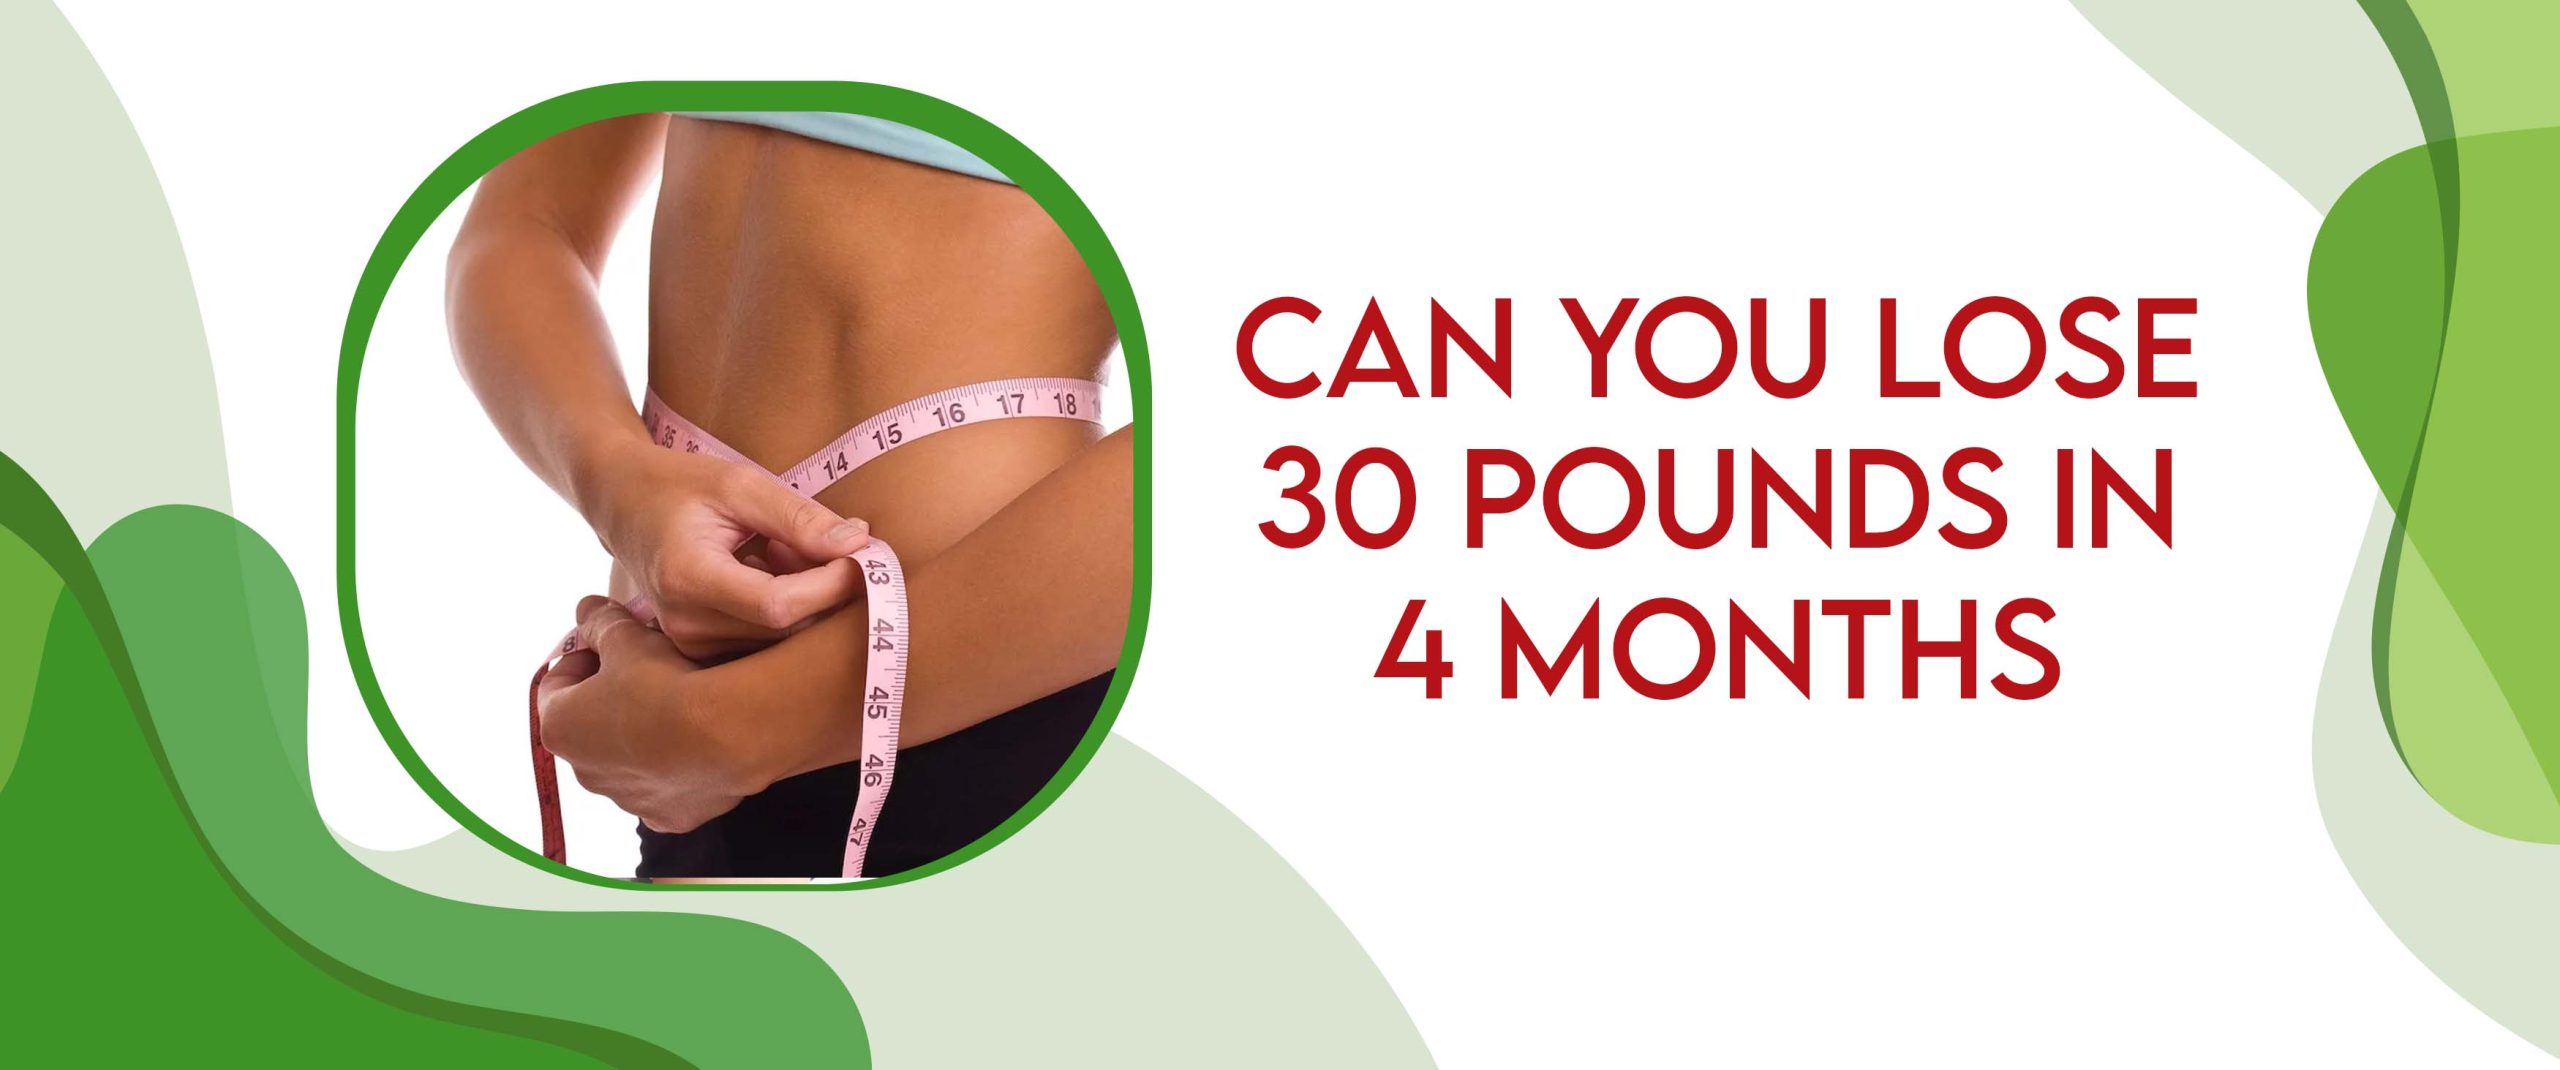 Can You Lose 30 Pounds In 4 Months